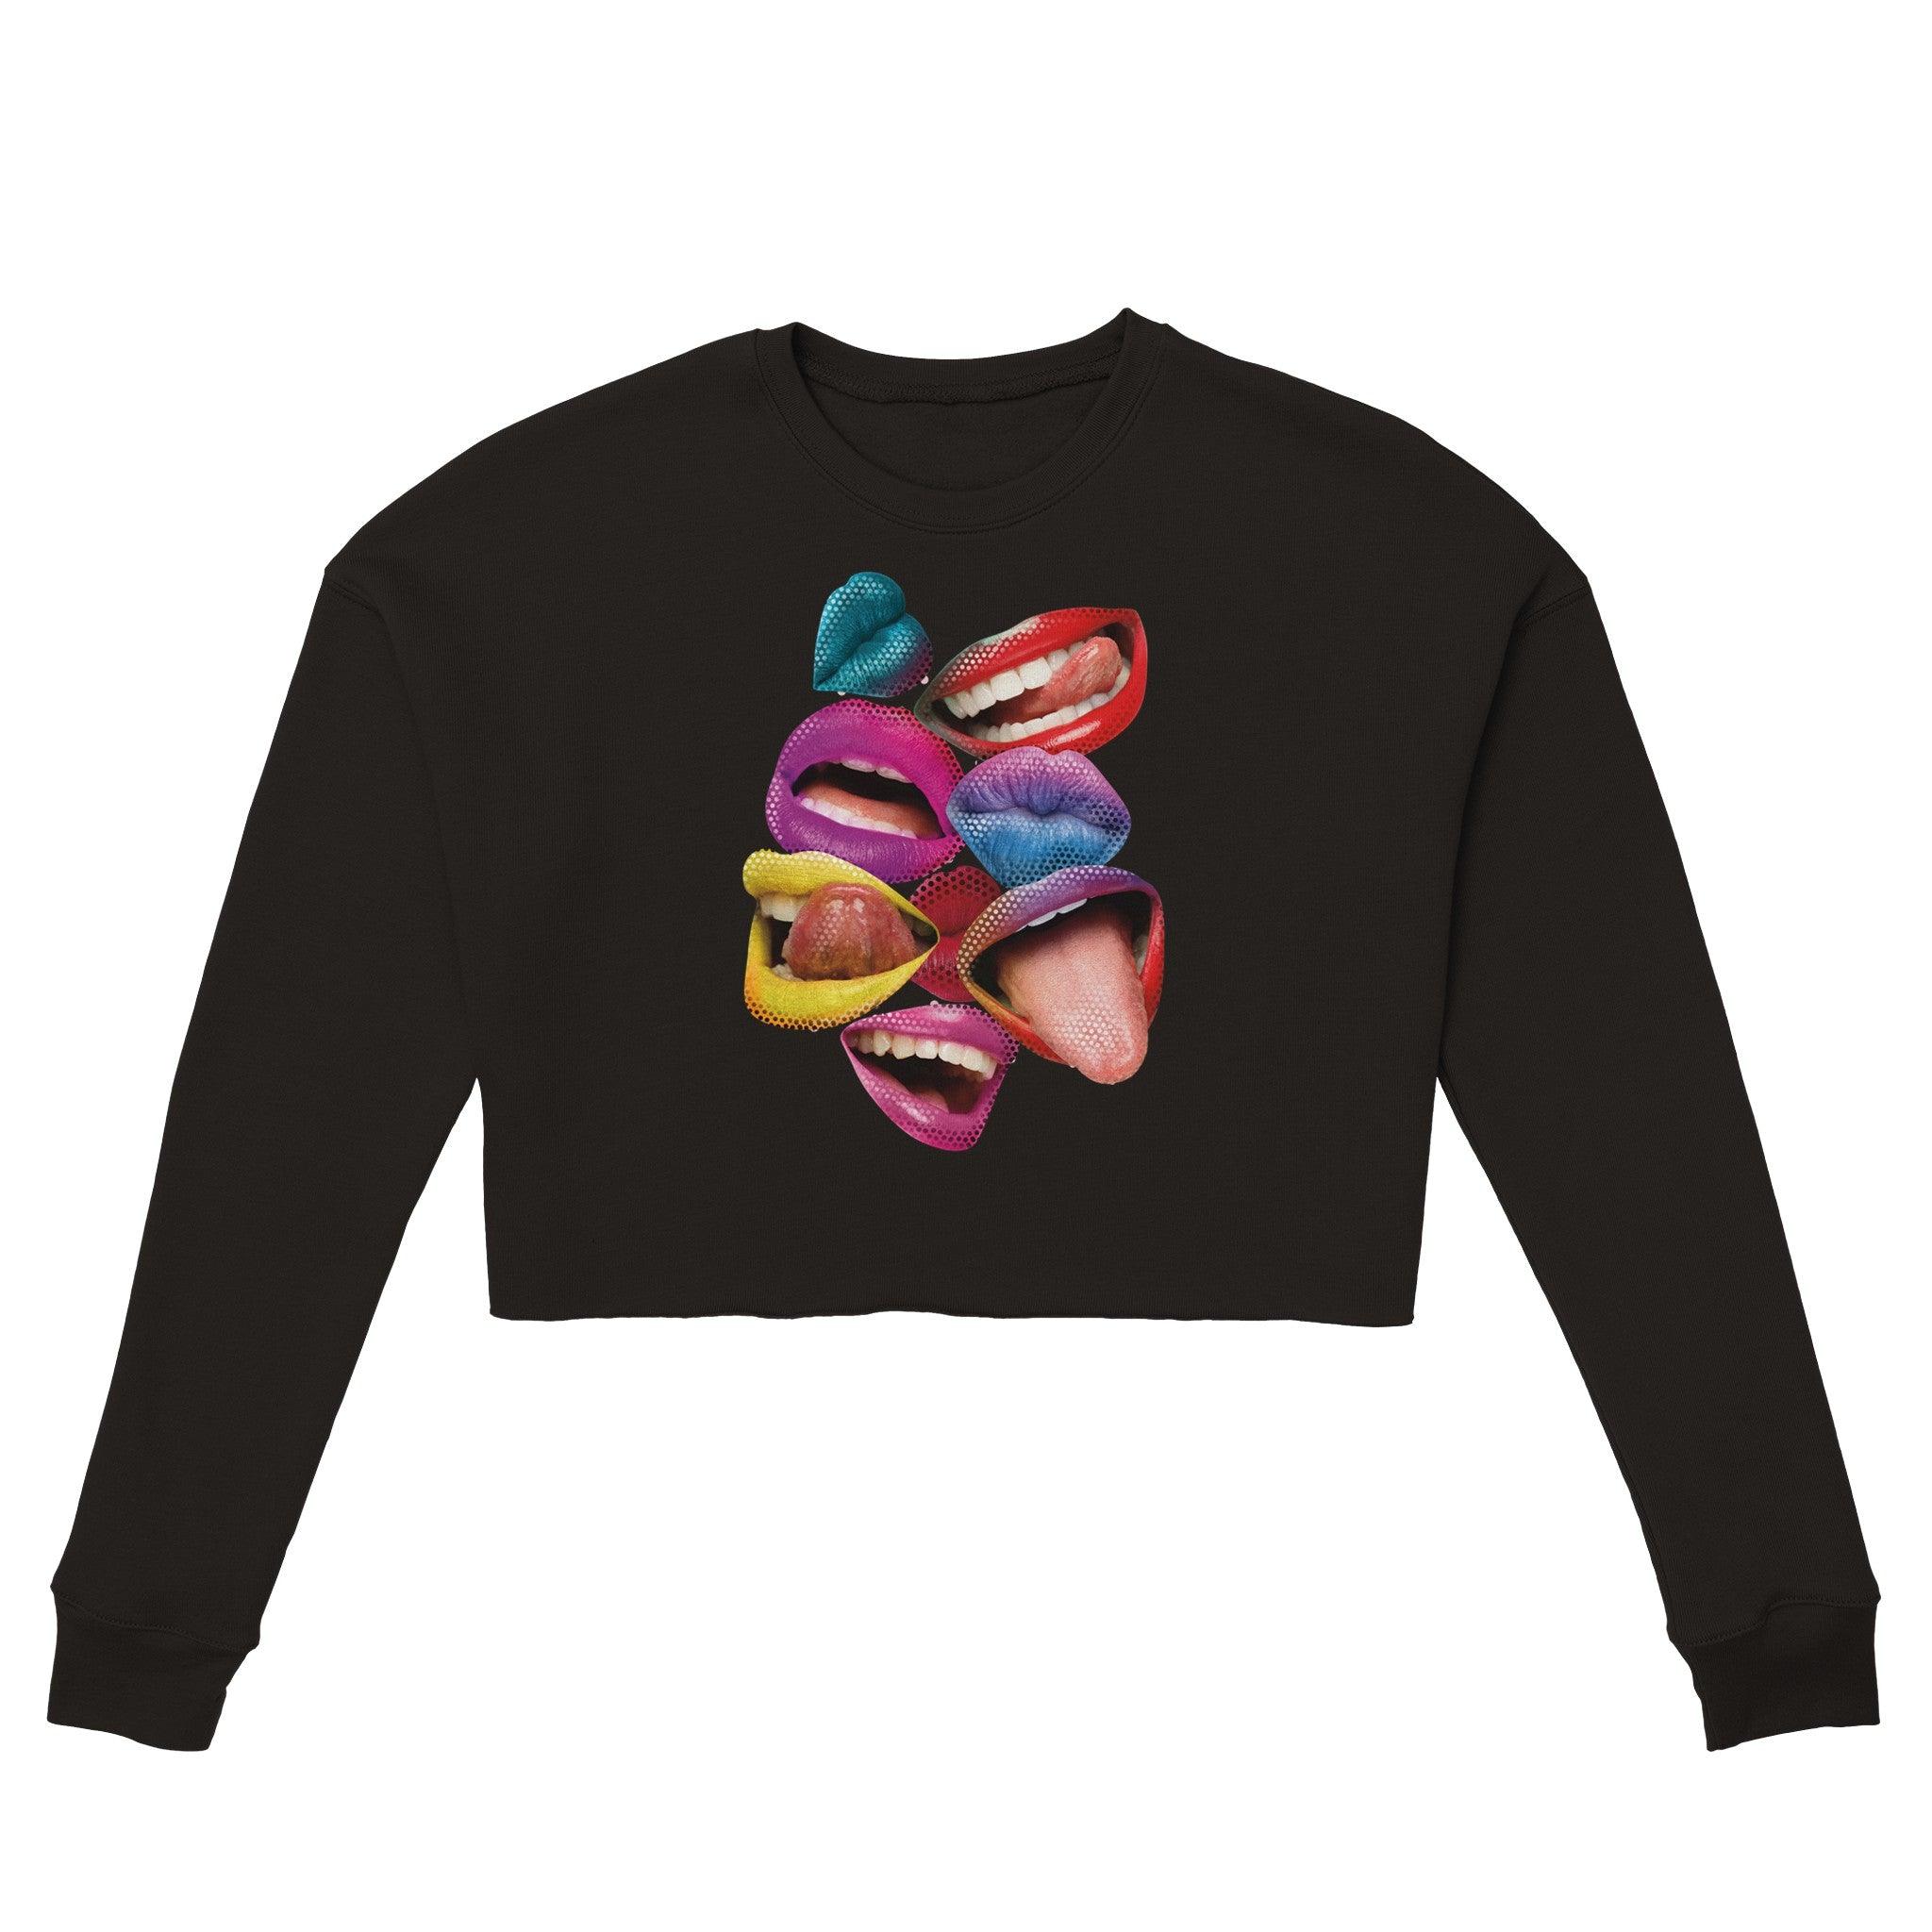 'Lips and Smiles' Cropped Sweatshirt - POMA